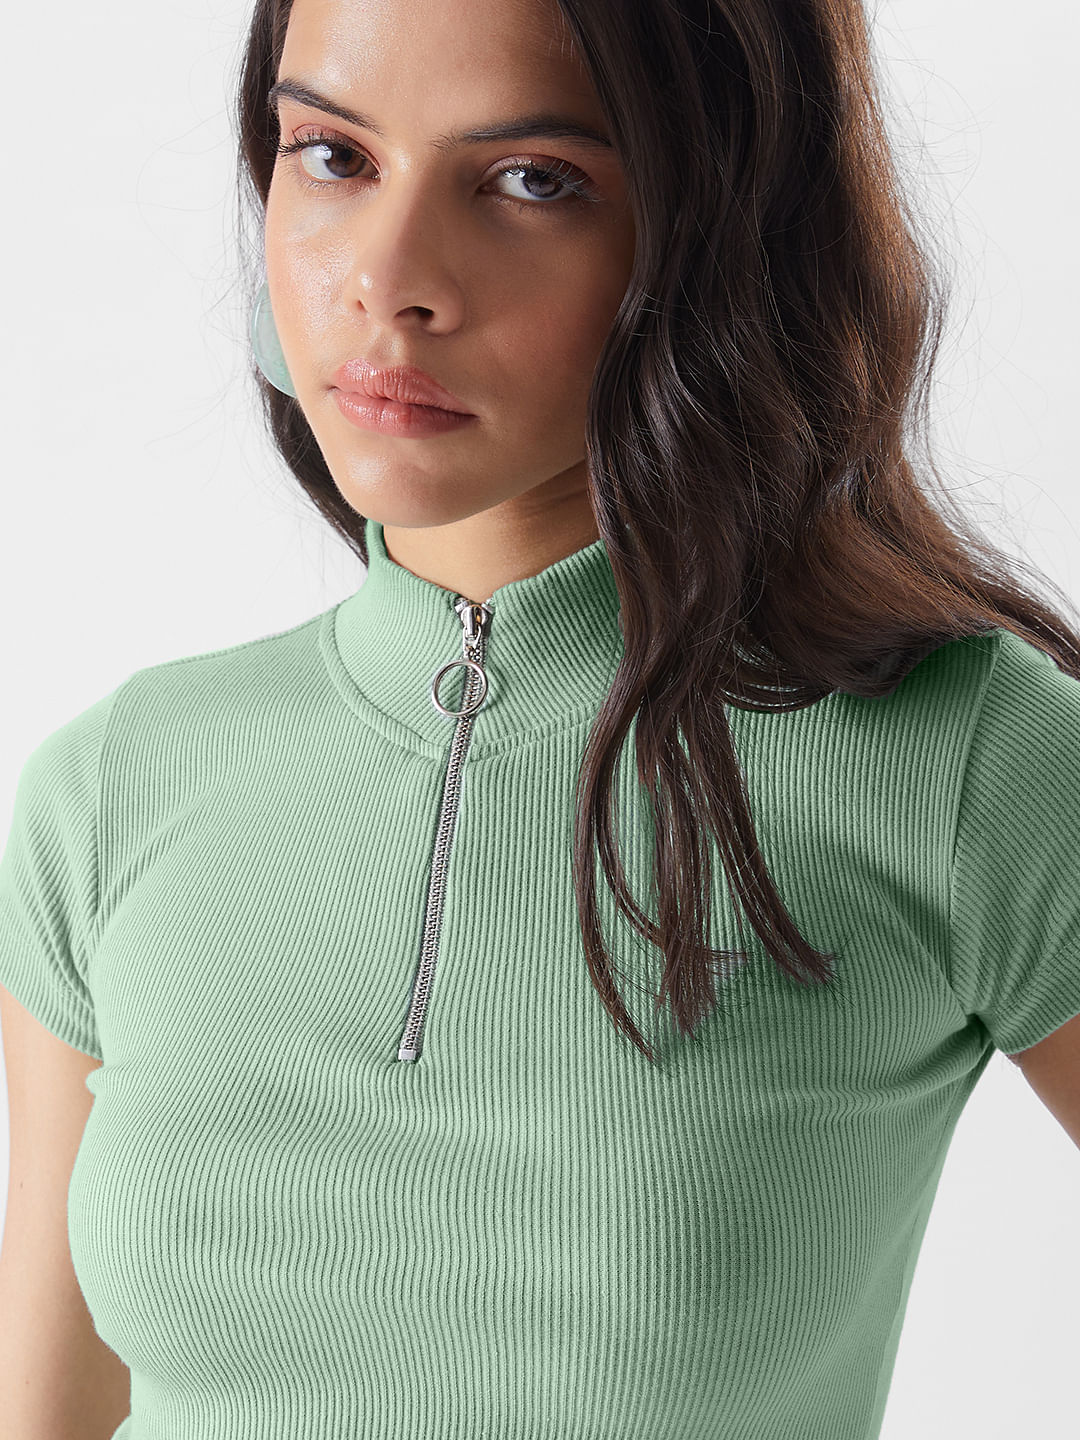 Buy Solids: Jade Green Women's Cropped Tops online at The Souled Store